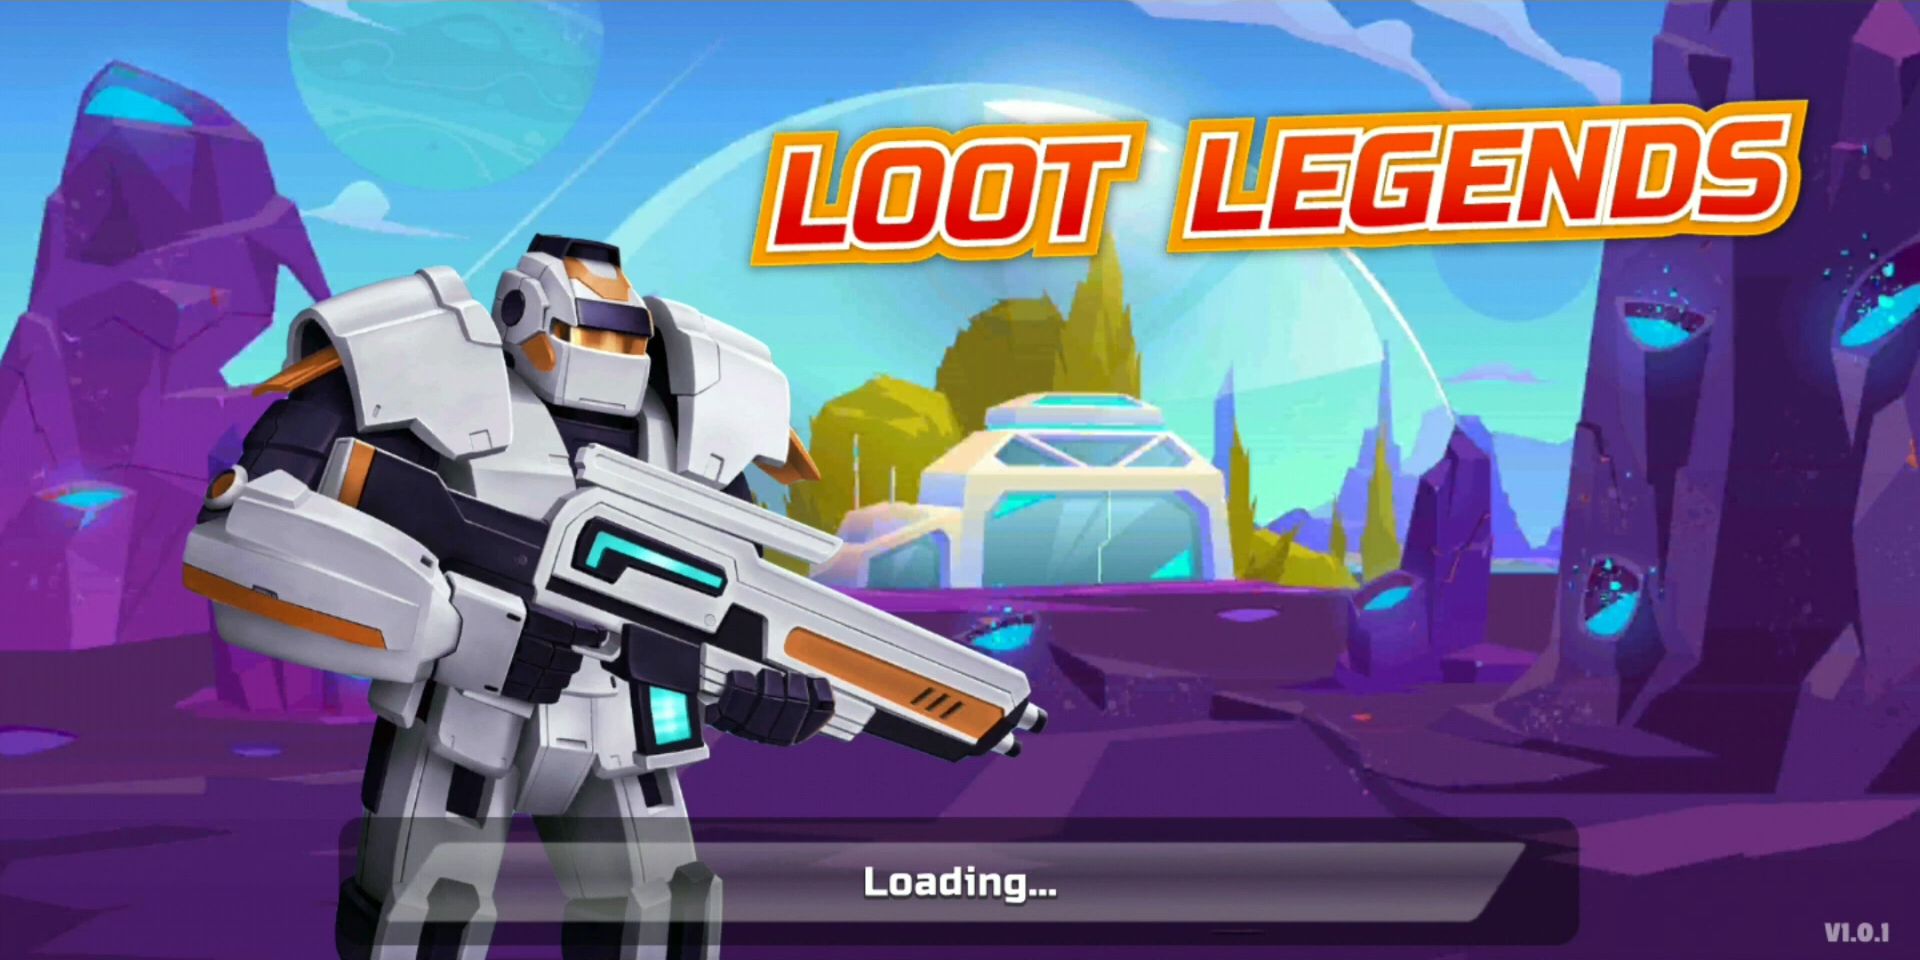 Download Loot Legends: Robots vs Aliens Android free game.